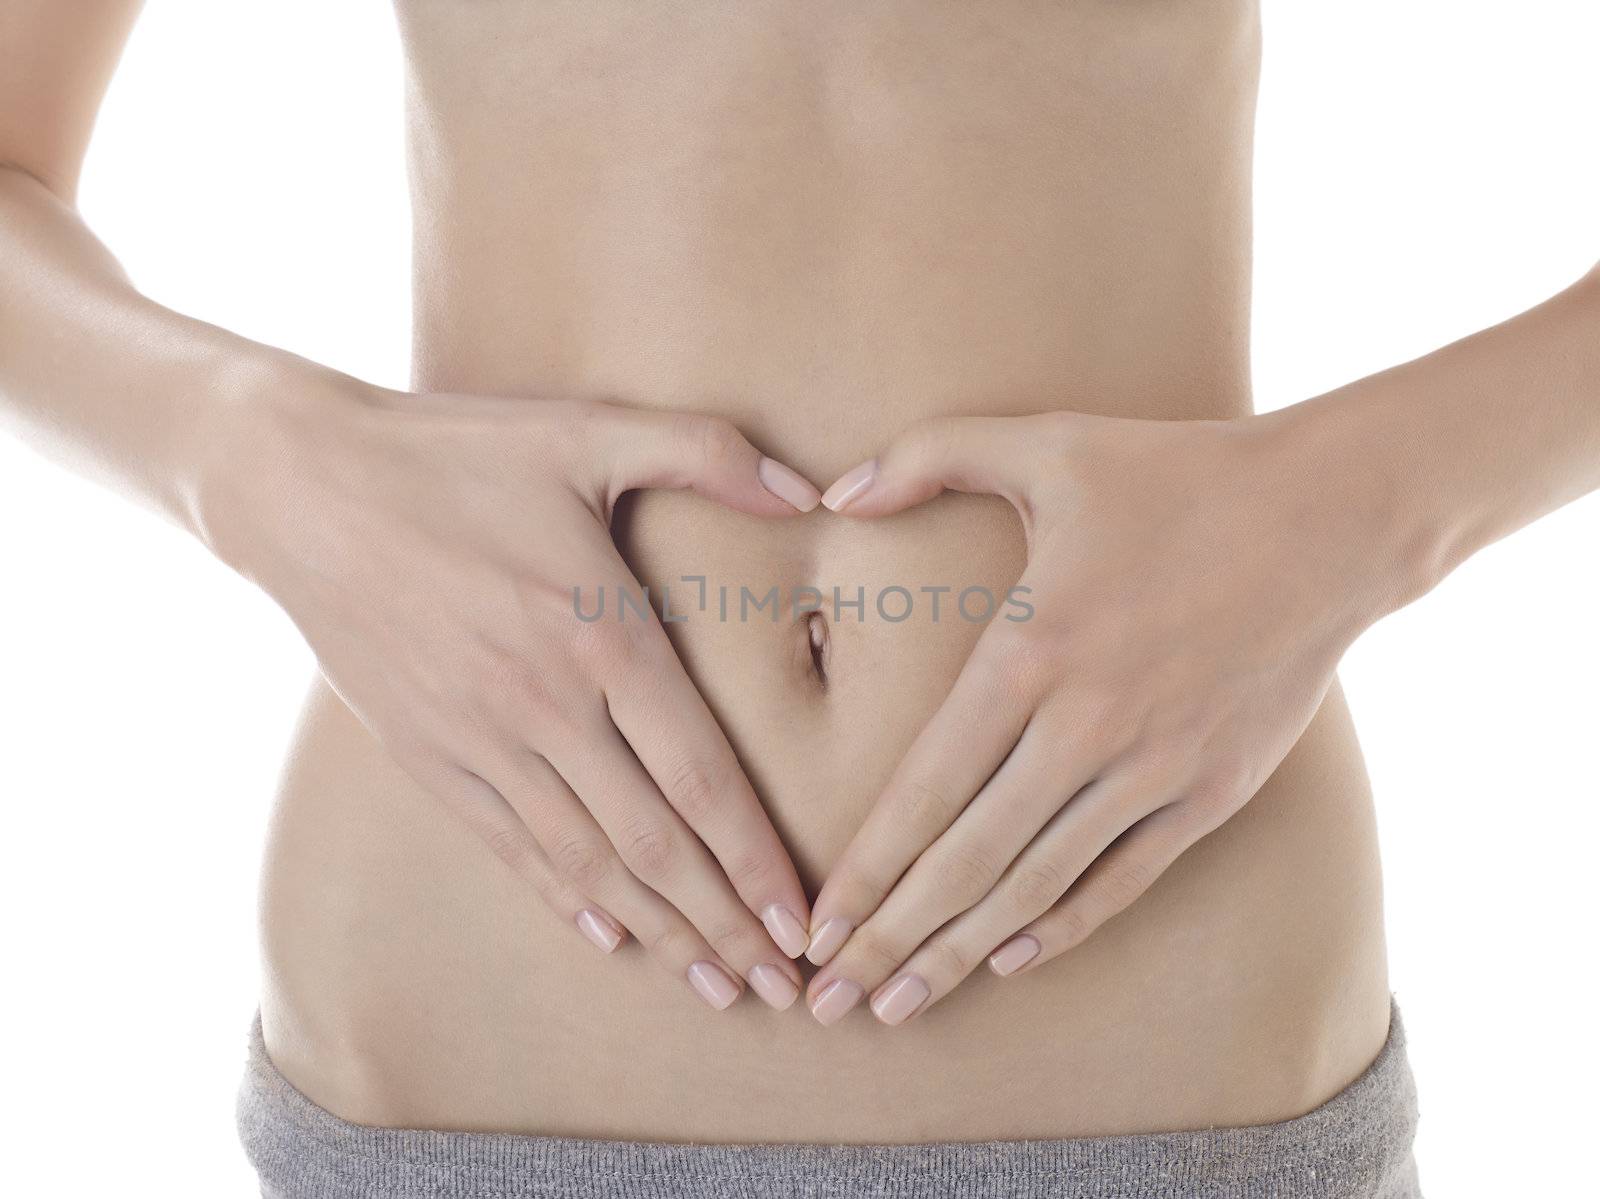 Closed up shot of a woman's belly button with hands forming a heart shape